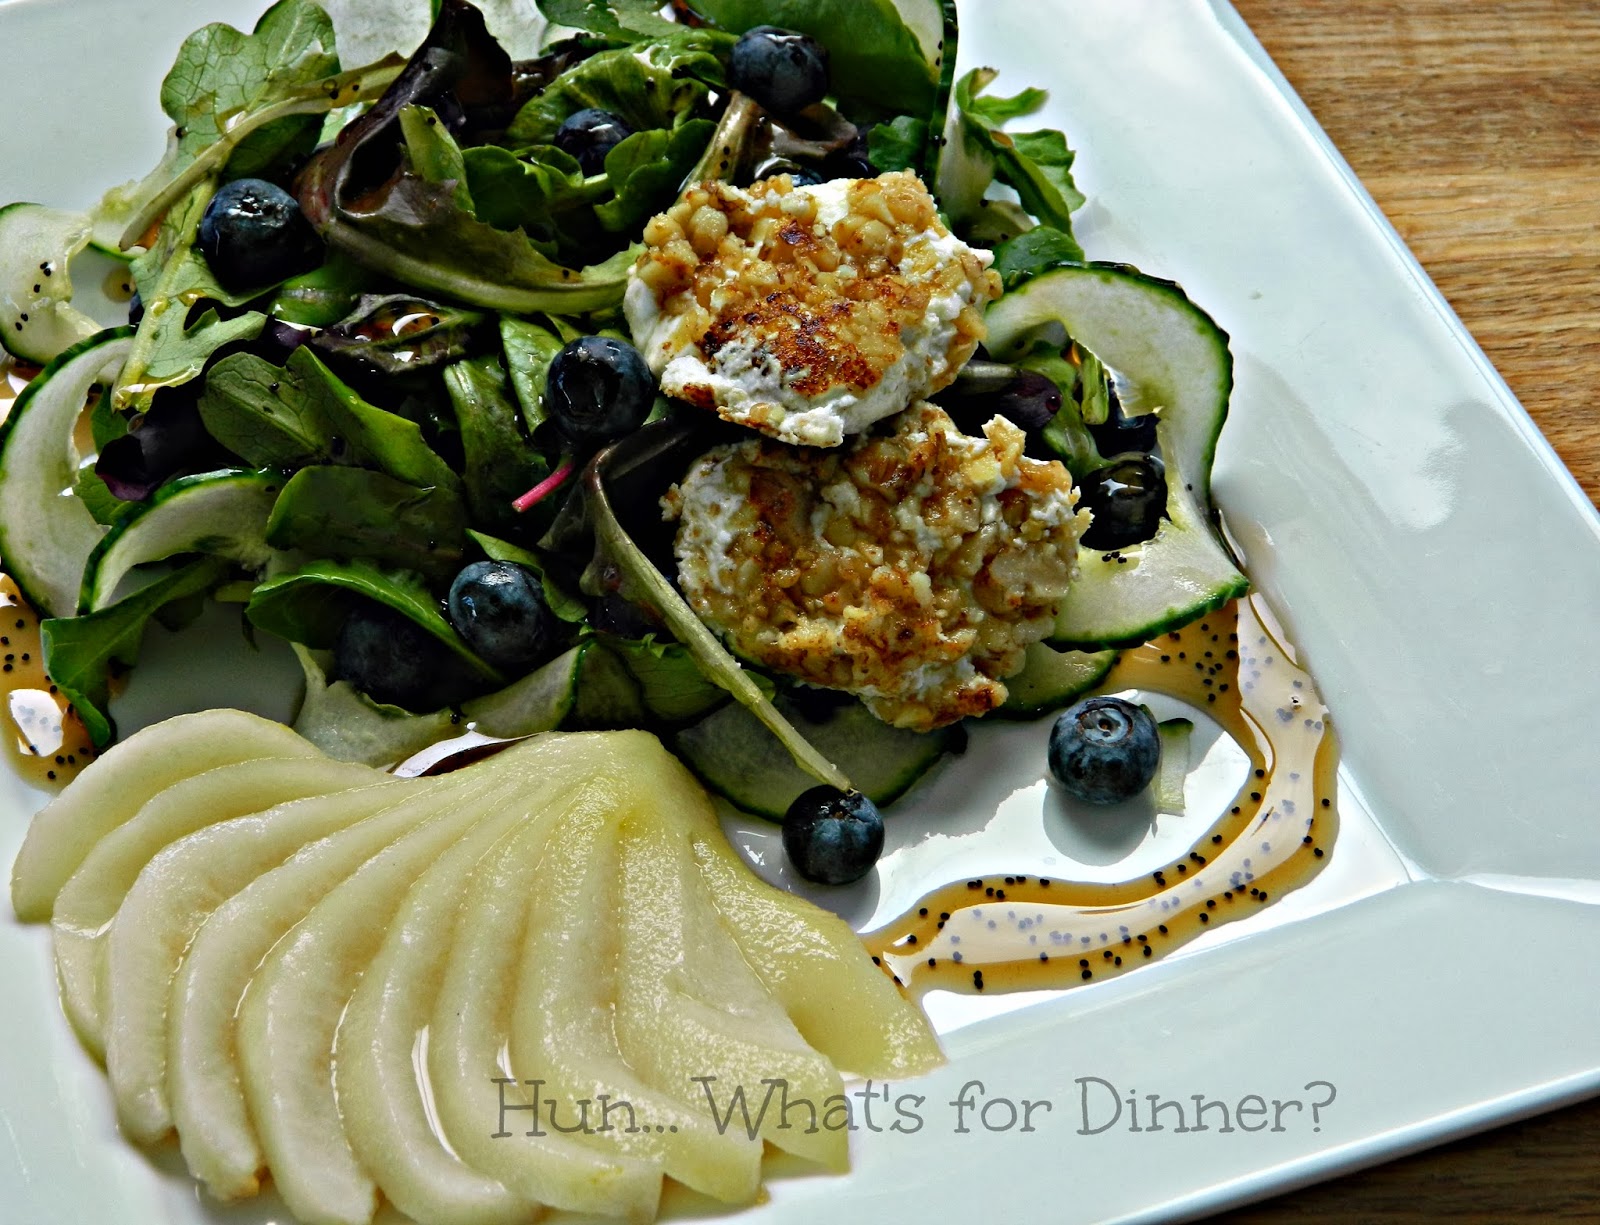 Hun... What's for Dinner?: Mixed greens paired with a maple poached pear, blueberries, walnut crusted goat cheese and drizzled with a maple poppy seed dressing.